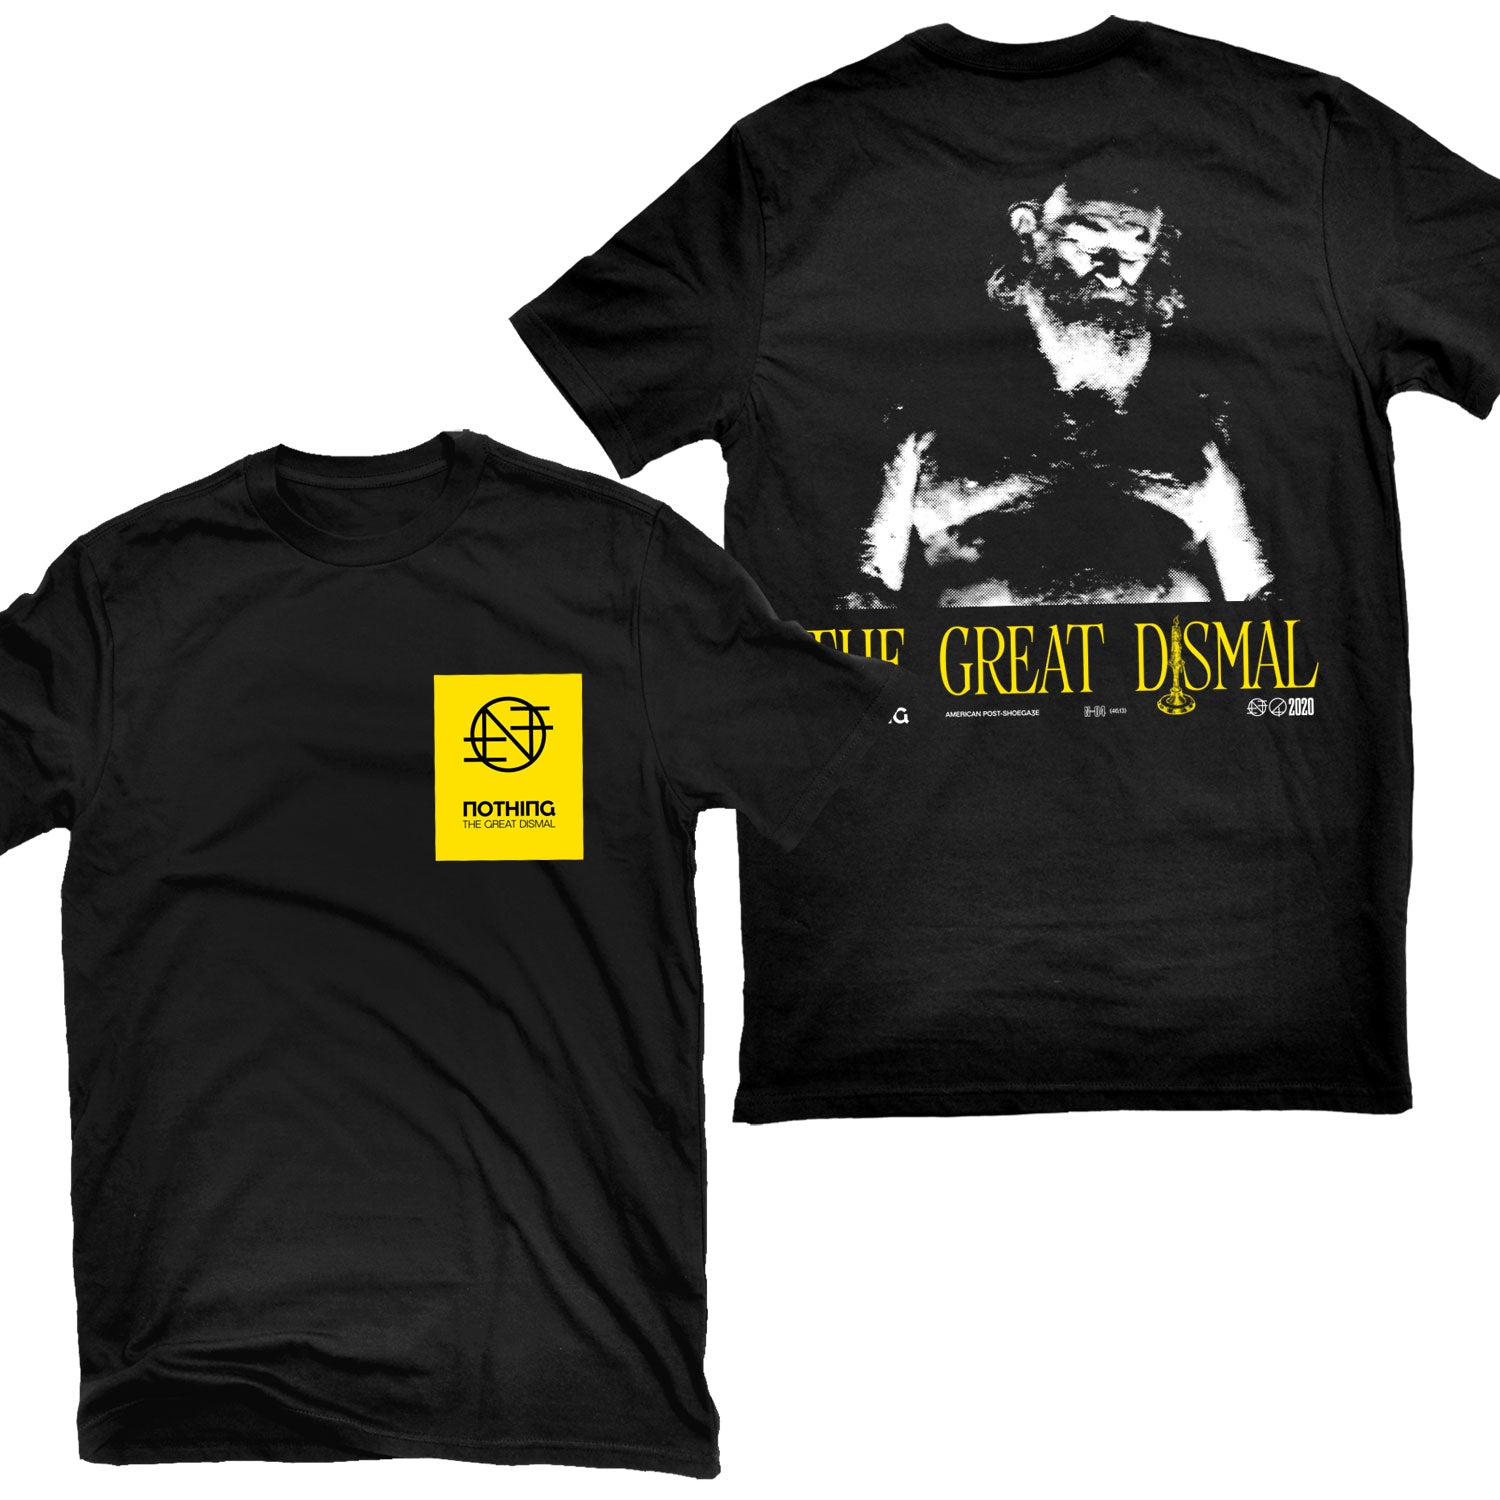 Nothing "The Great Dismal" T-Shirt